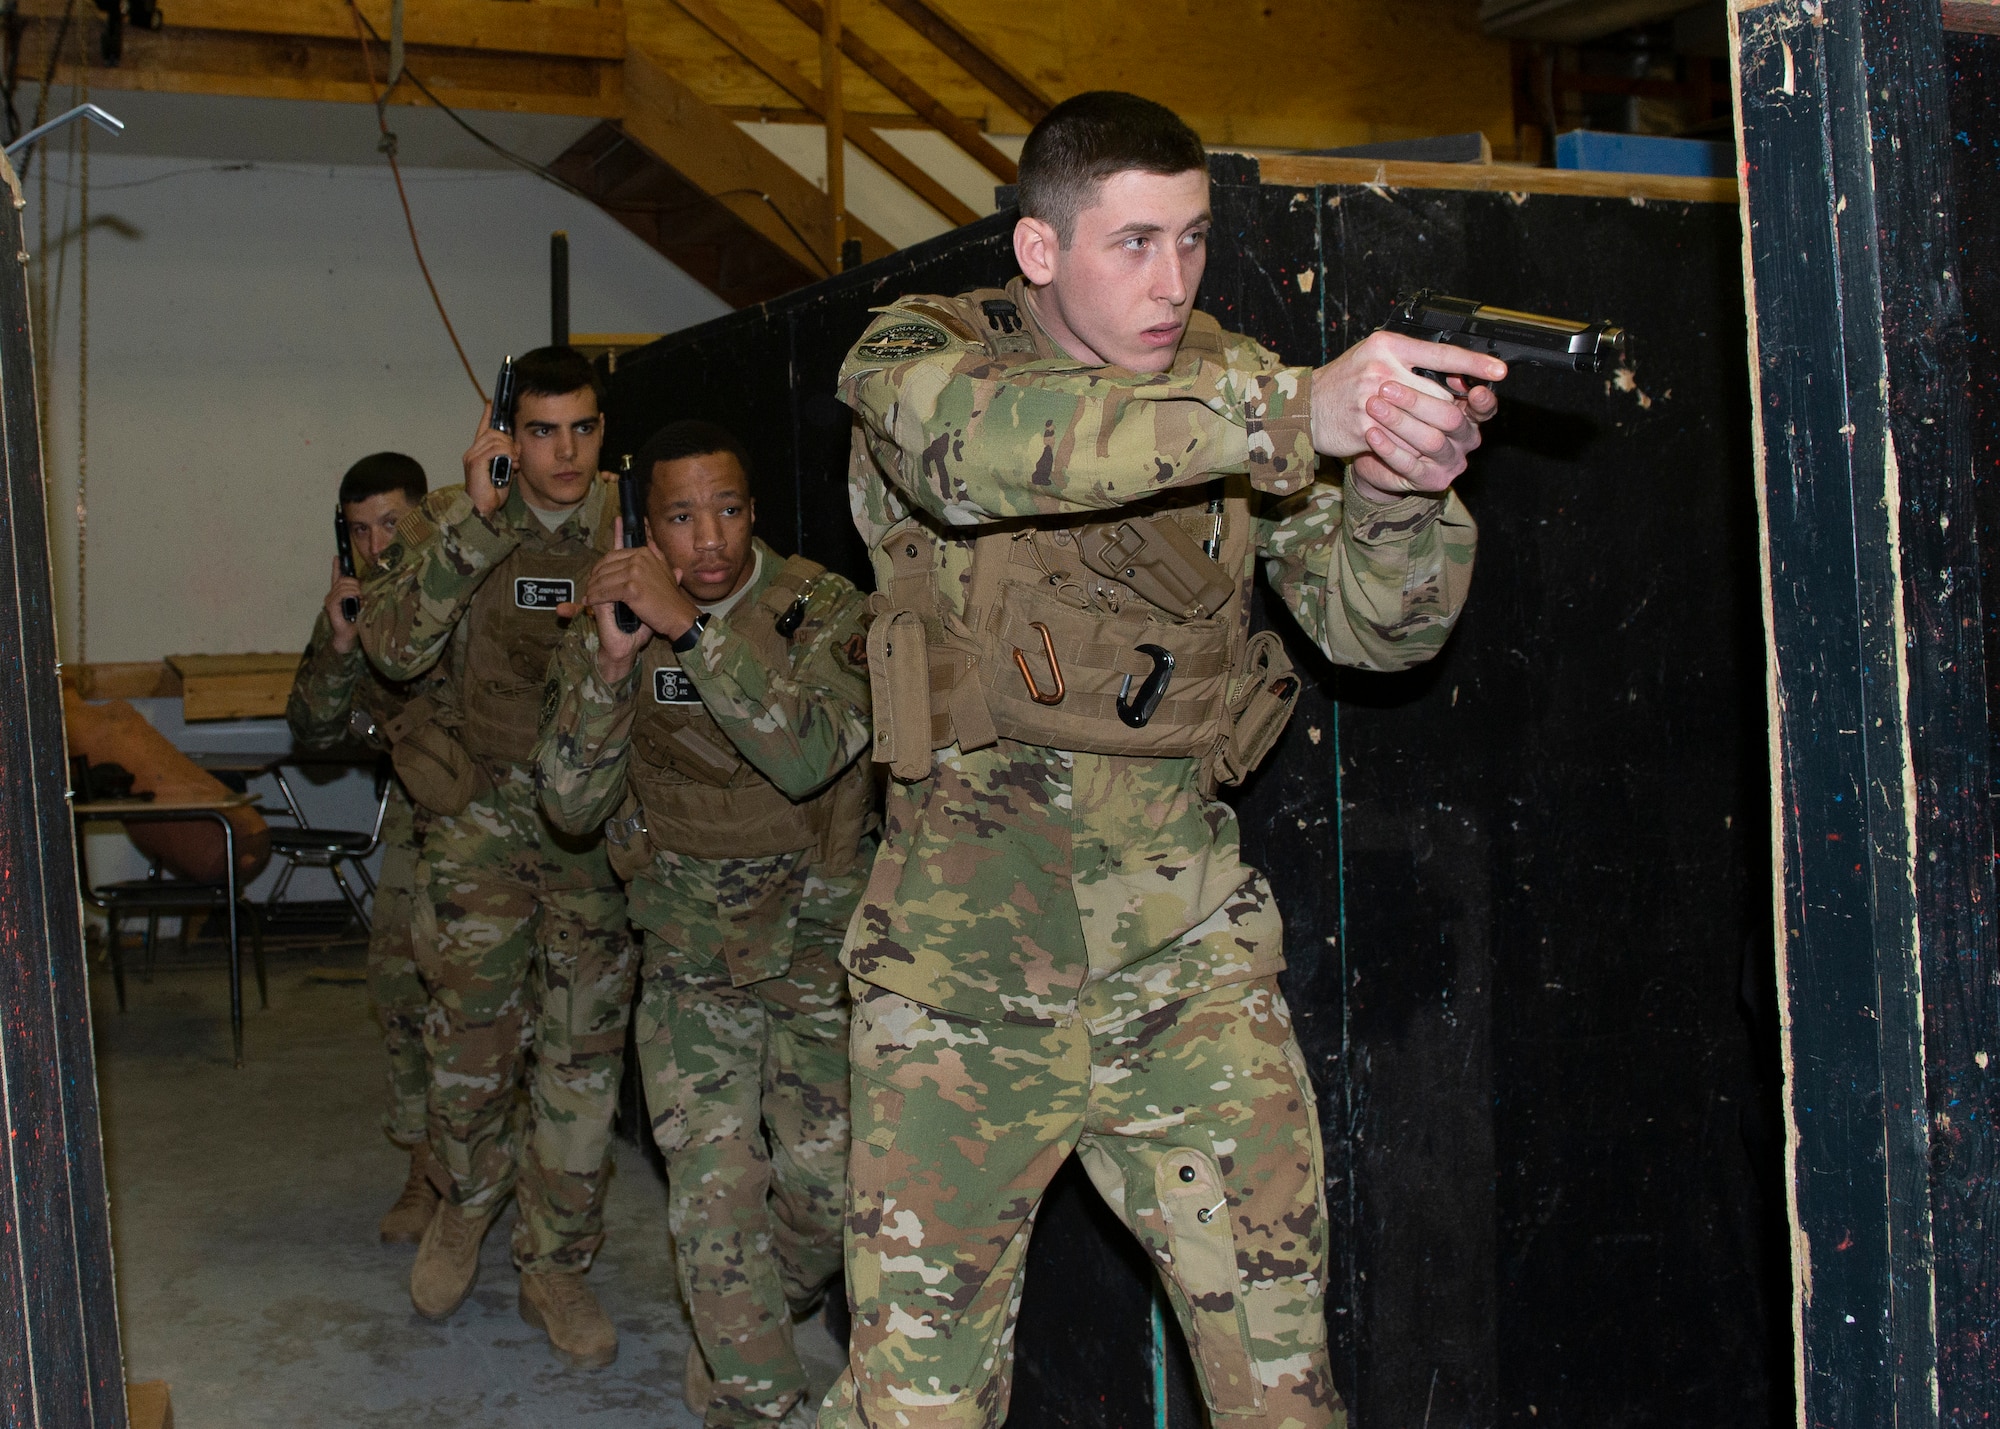 photograph of four Airmen with weapons in their hands as they move along a wall inside training area